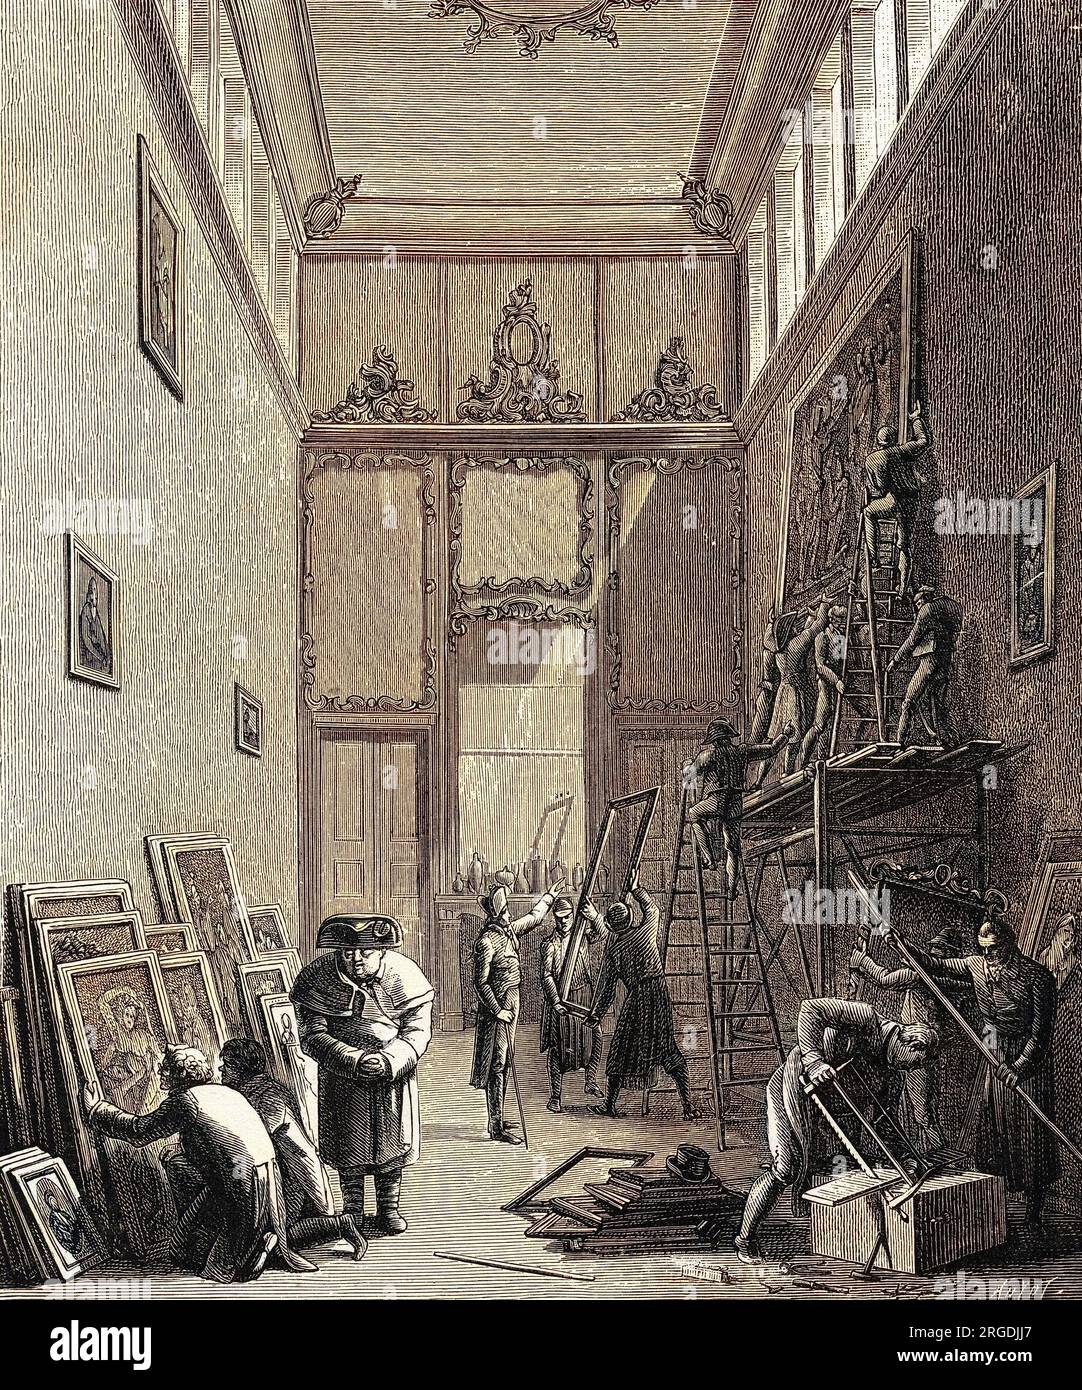 Removal of paintings and artworks from the Cassel gallery in Dresden by Napoleon's soldiers after the Battle of Dresden in 1813: a German caricature against Napoleon and Dominique Vivant Denon, who Napoleon made first director of the Louvre Museum in Paris, the implication being that Dresden's artworks are bolstering the holdings of the Louvre. Stock Photo